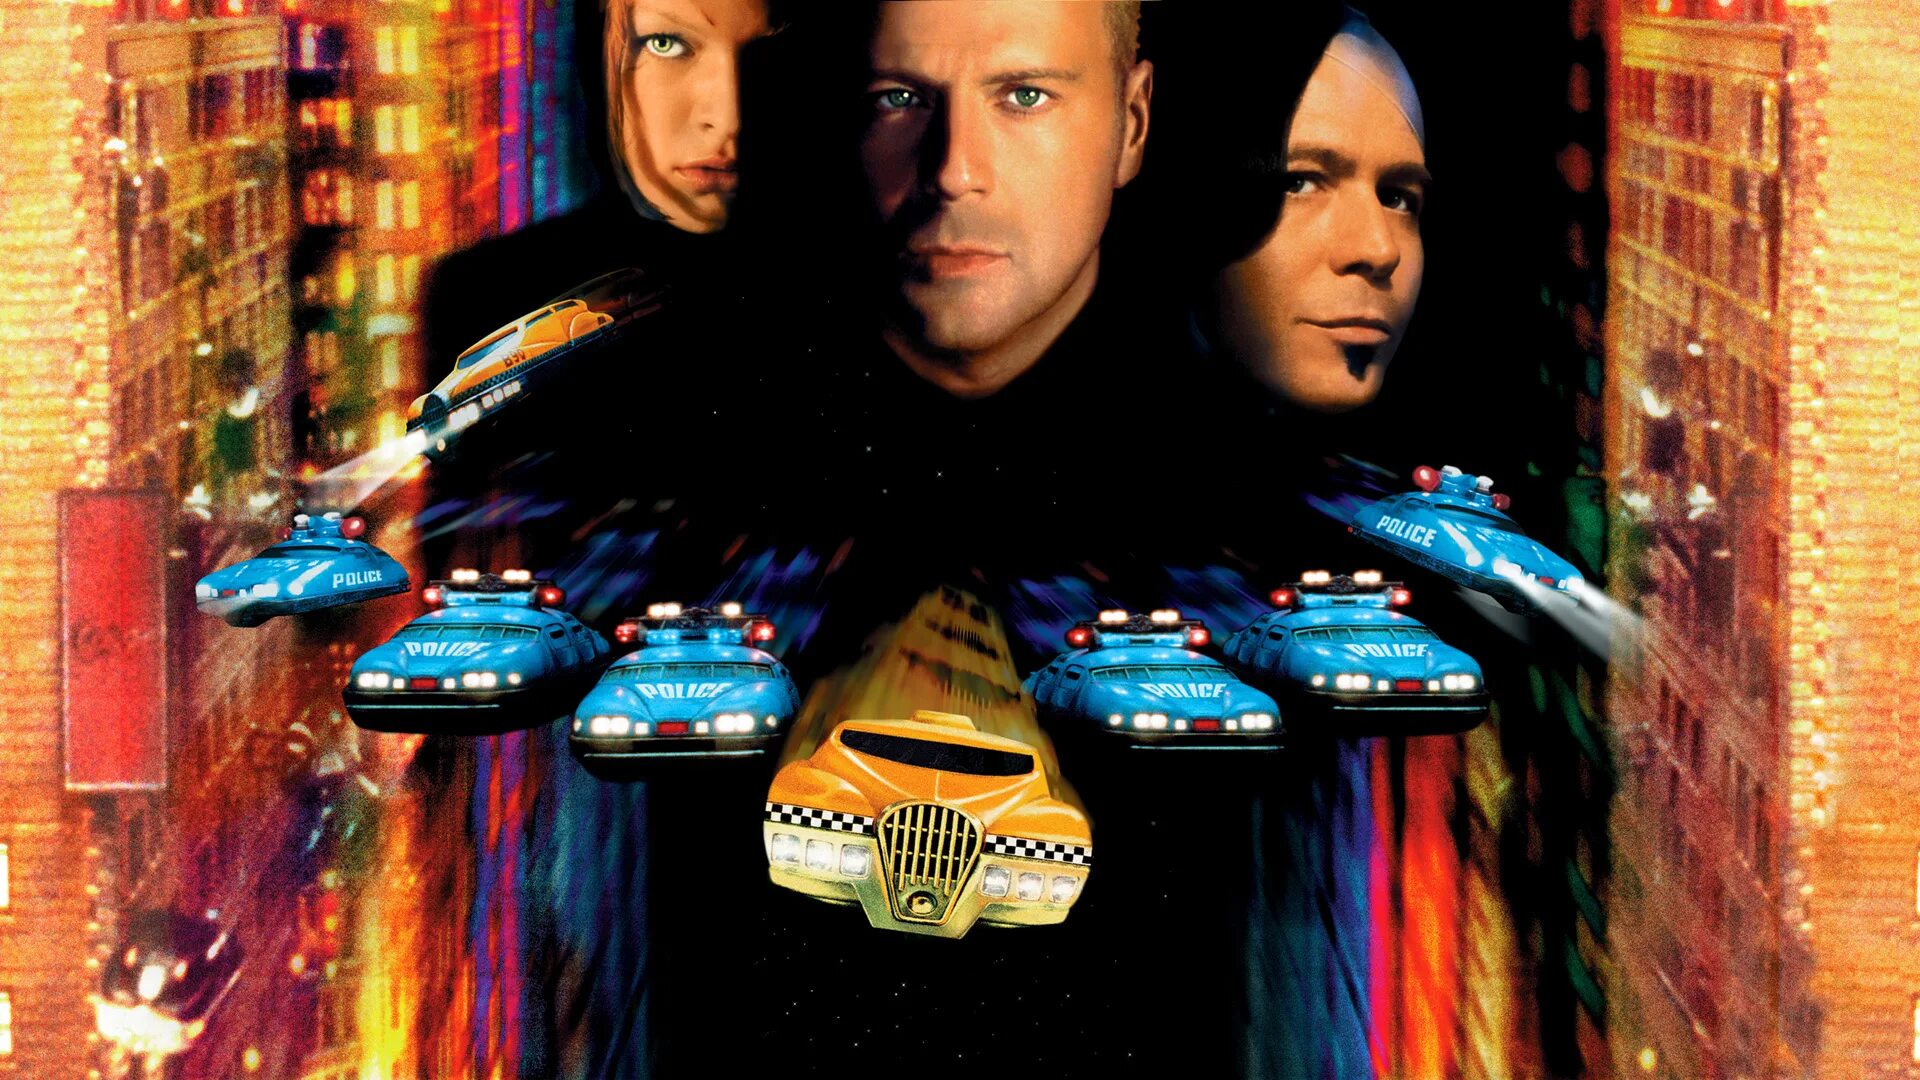 5 элемент 37. The Fifth element 1997. The Fifth element / пятый элемент. Милла Йовович 5 элемент.